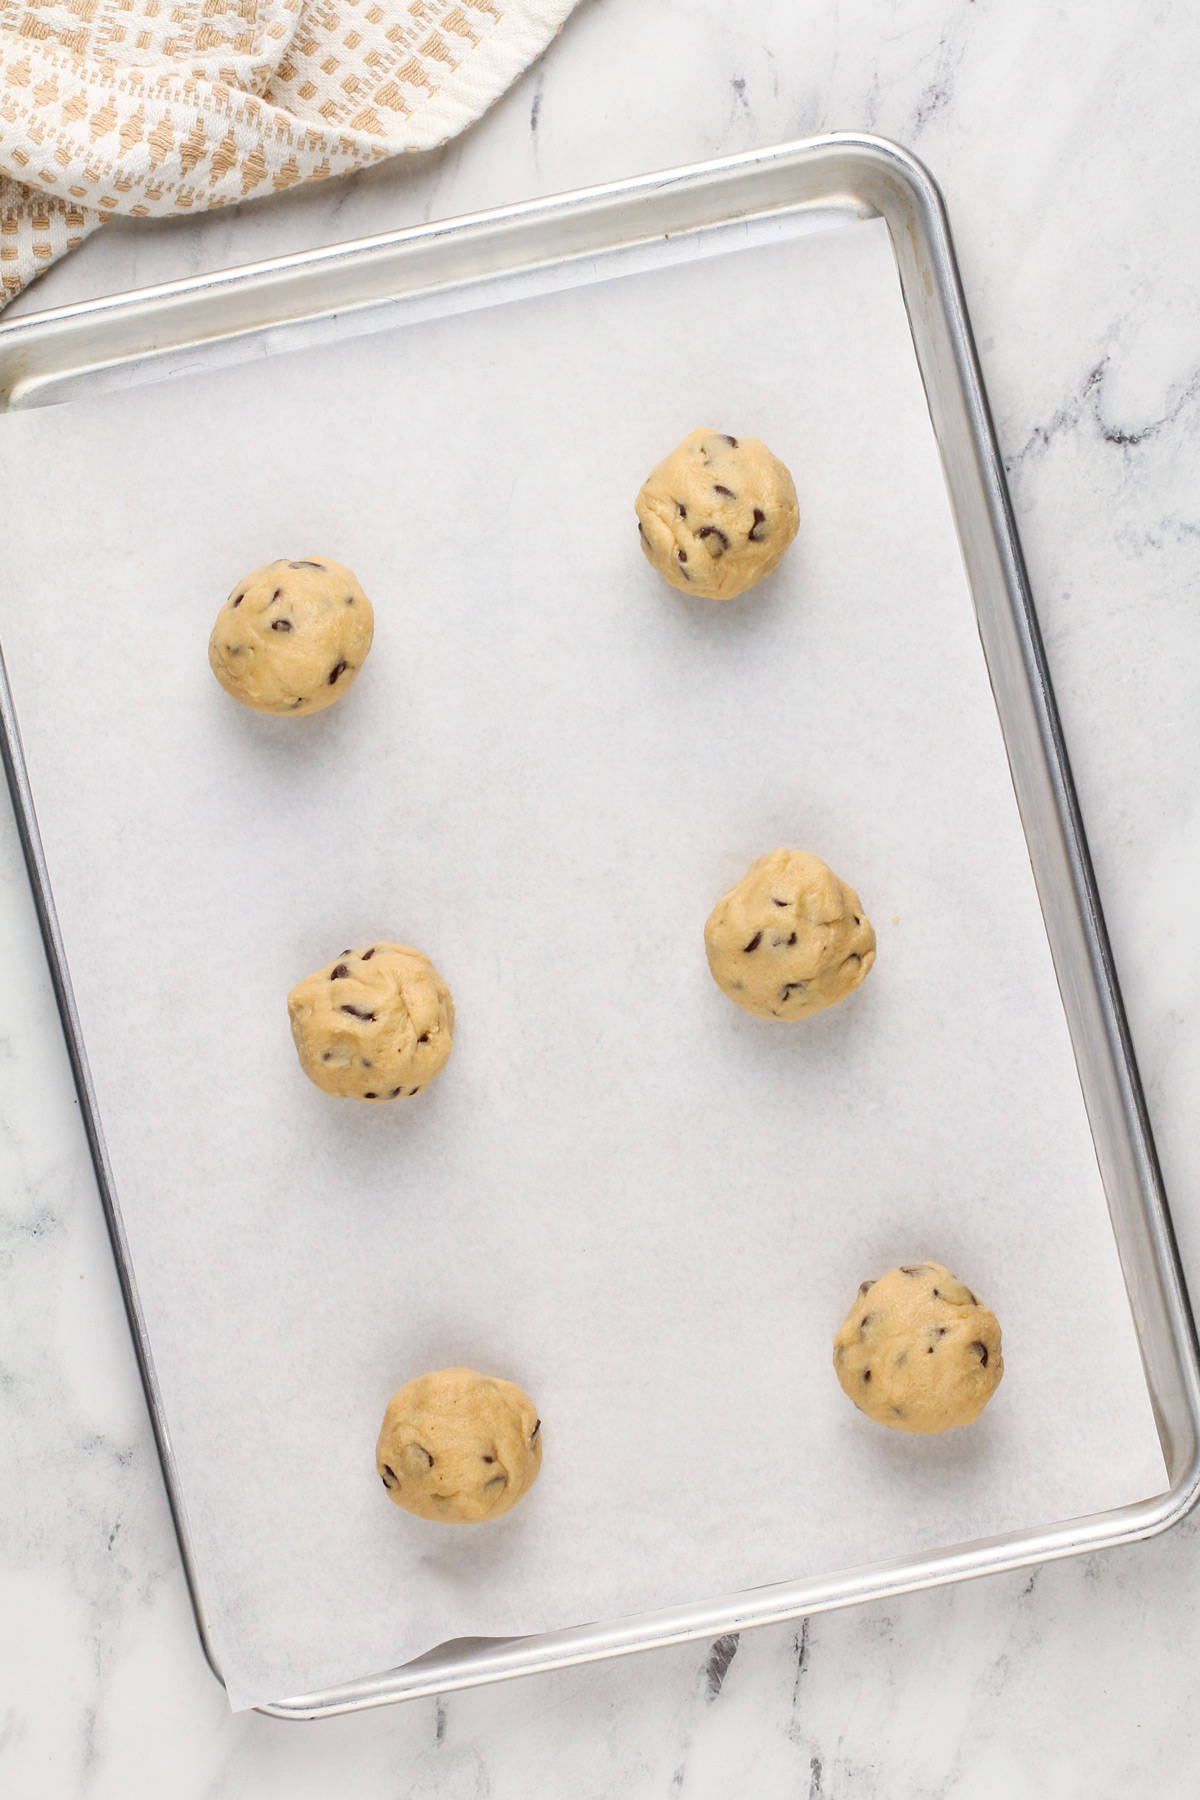 Six balls of grand floridian chocolate chip cookie dough on a parchment-lined baking sheet.